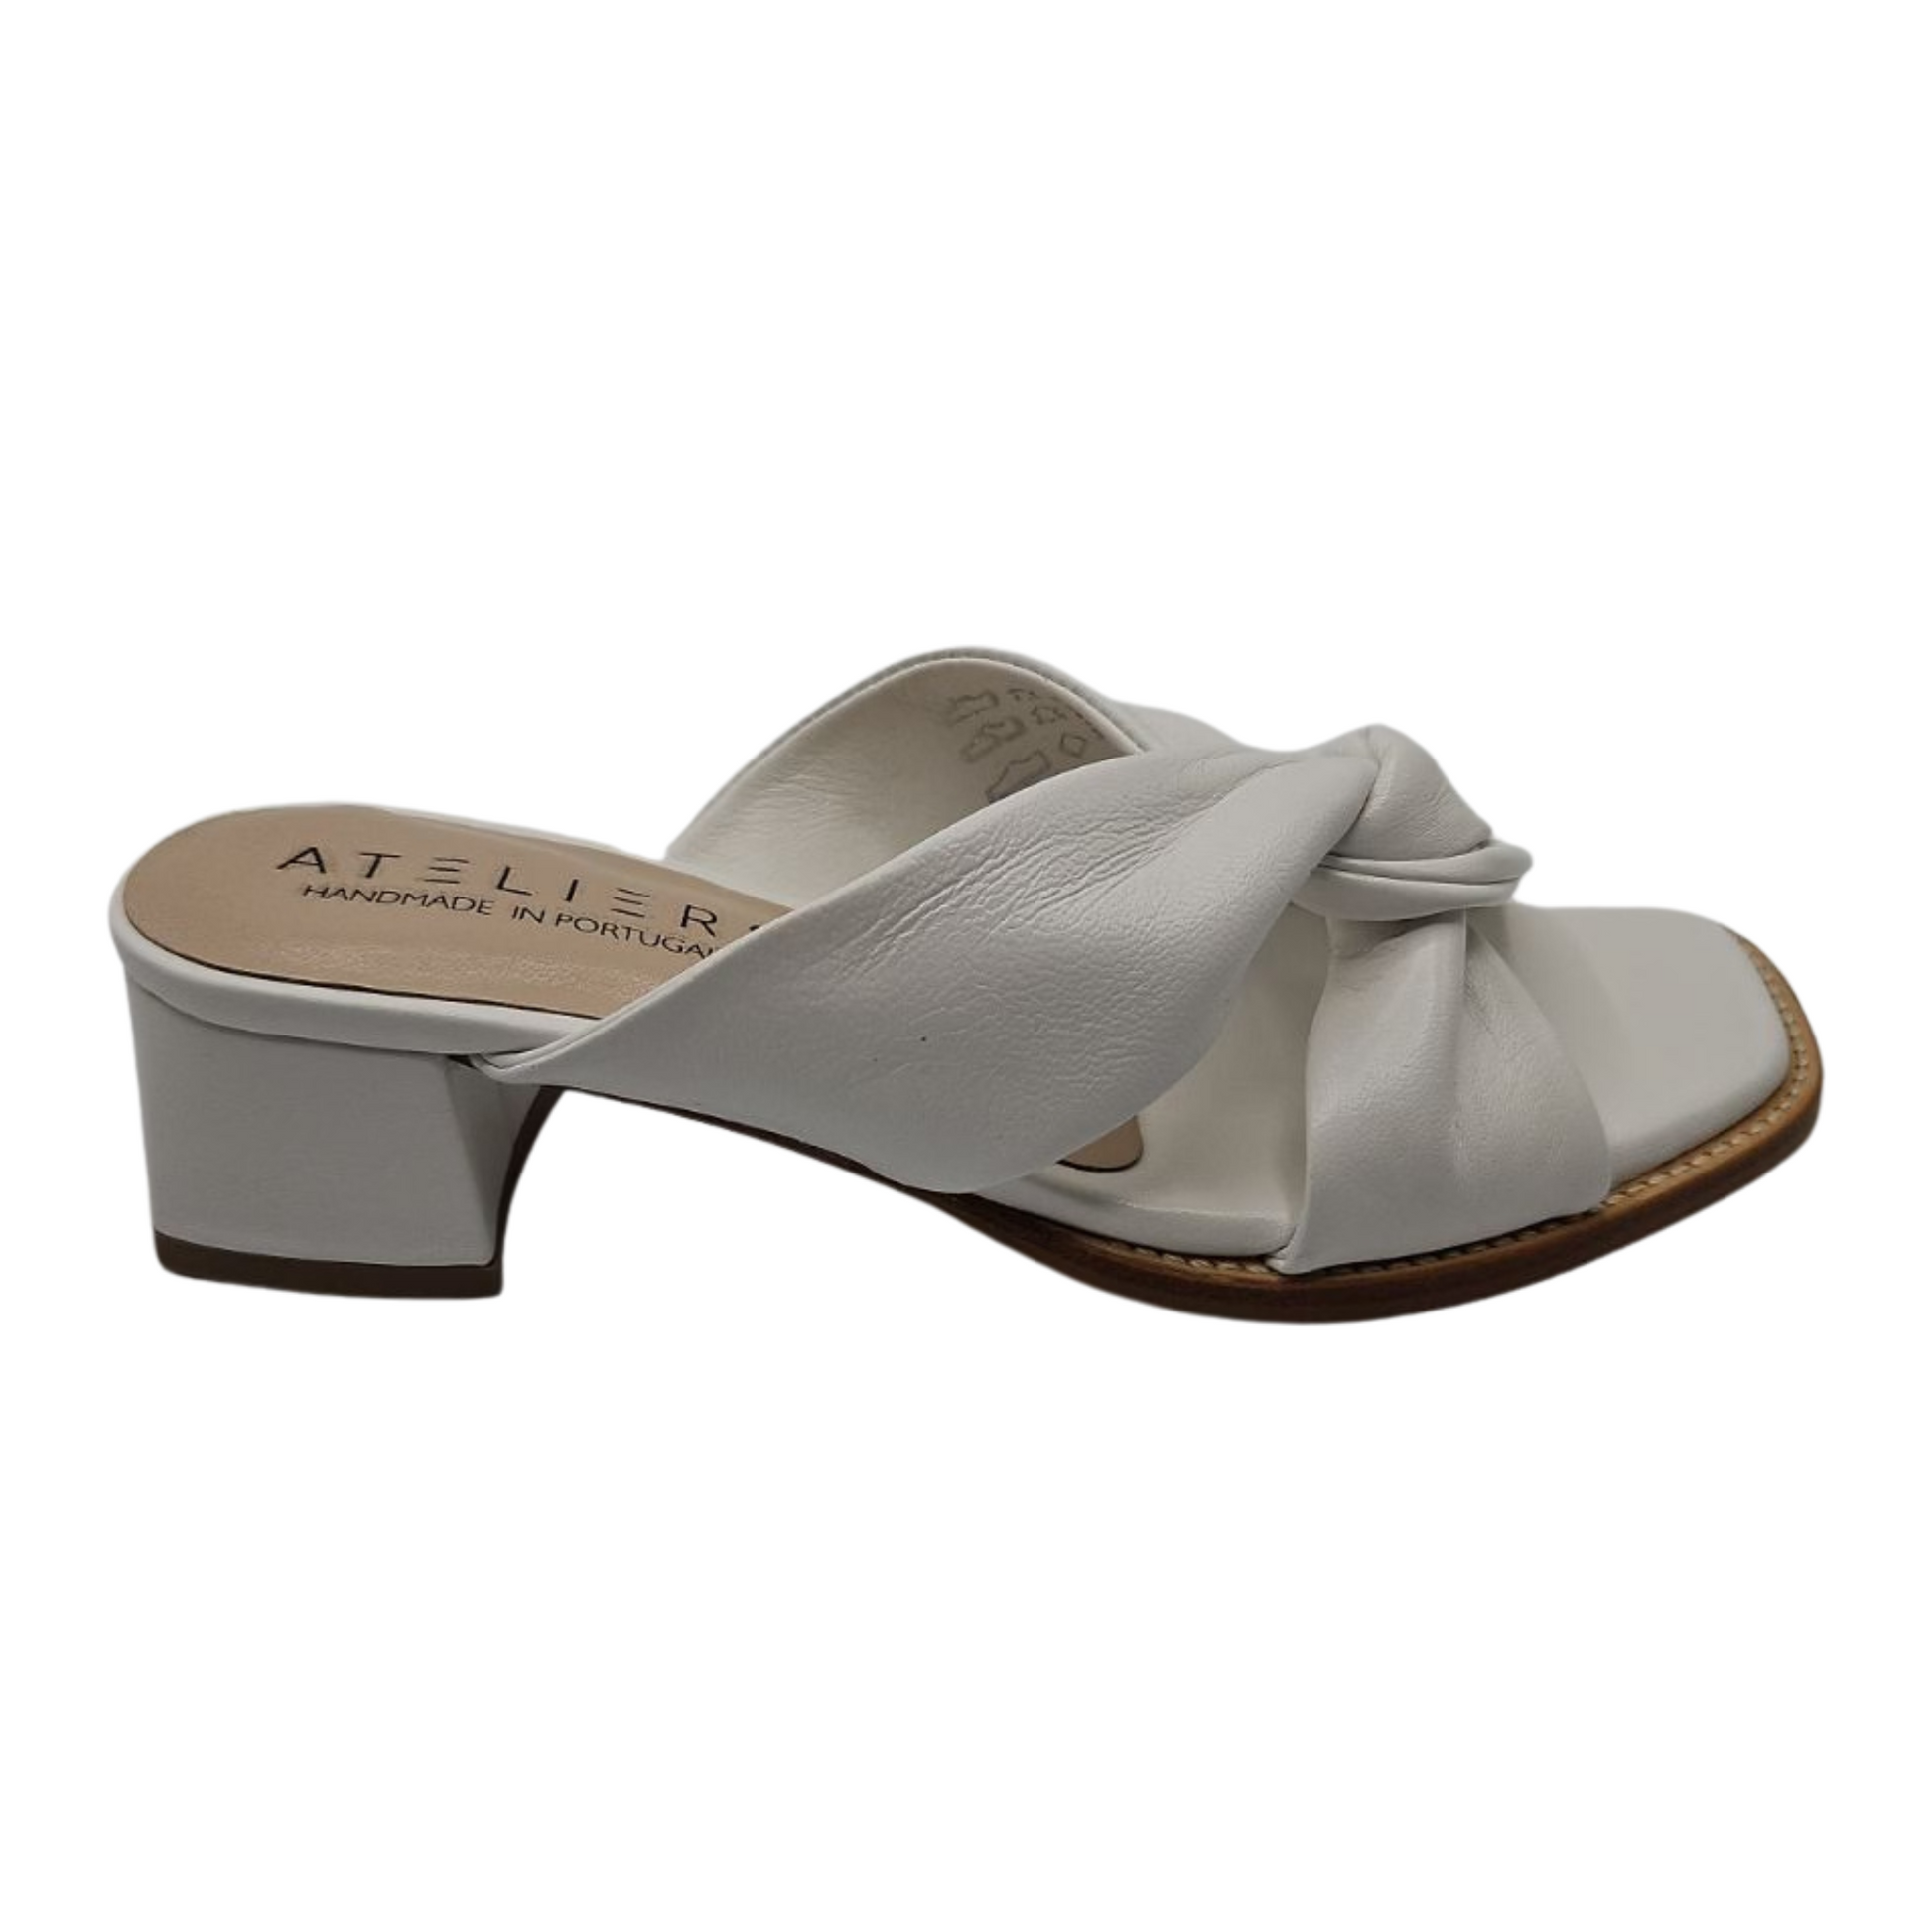 Right facing view of white leather sandals with a soft square toe. These heels have a leather lining and leather wrapped block heel. Knotted straps on upper